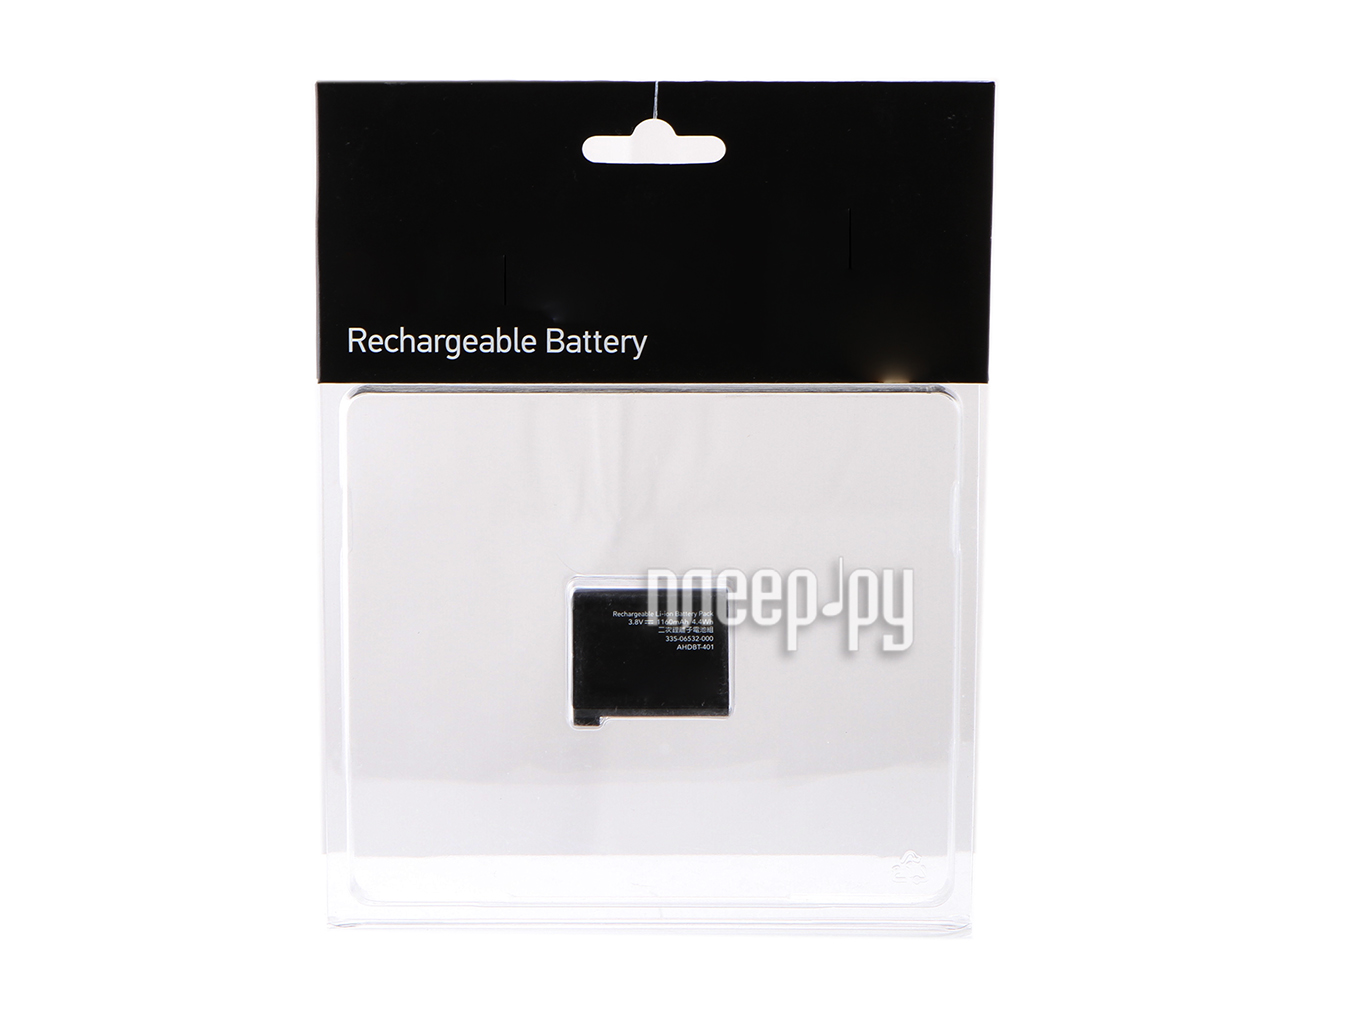  GoPro Rechargeable Battery for HERO4 AHDBT-401  1920 